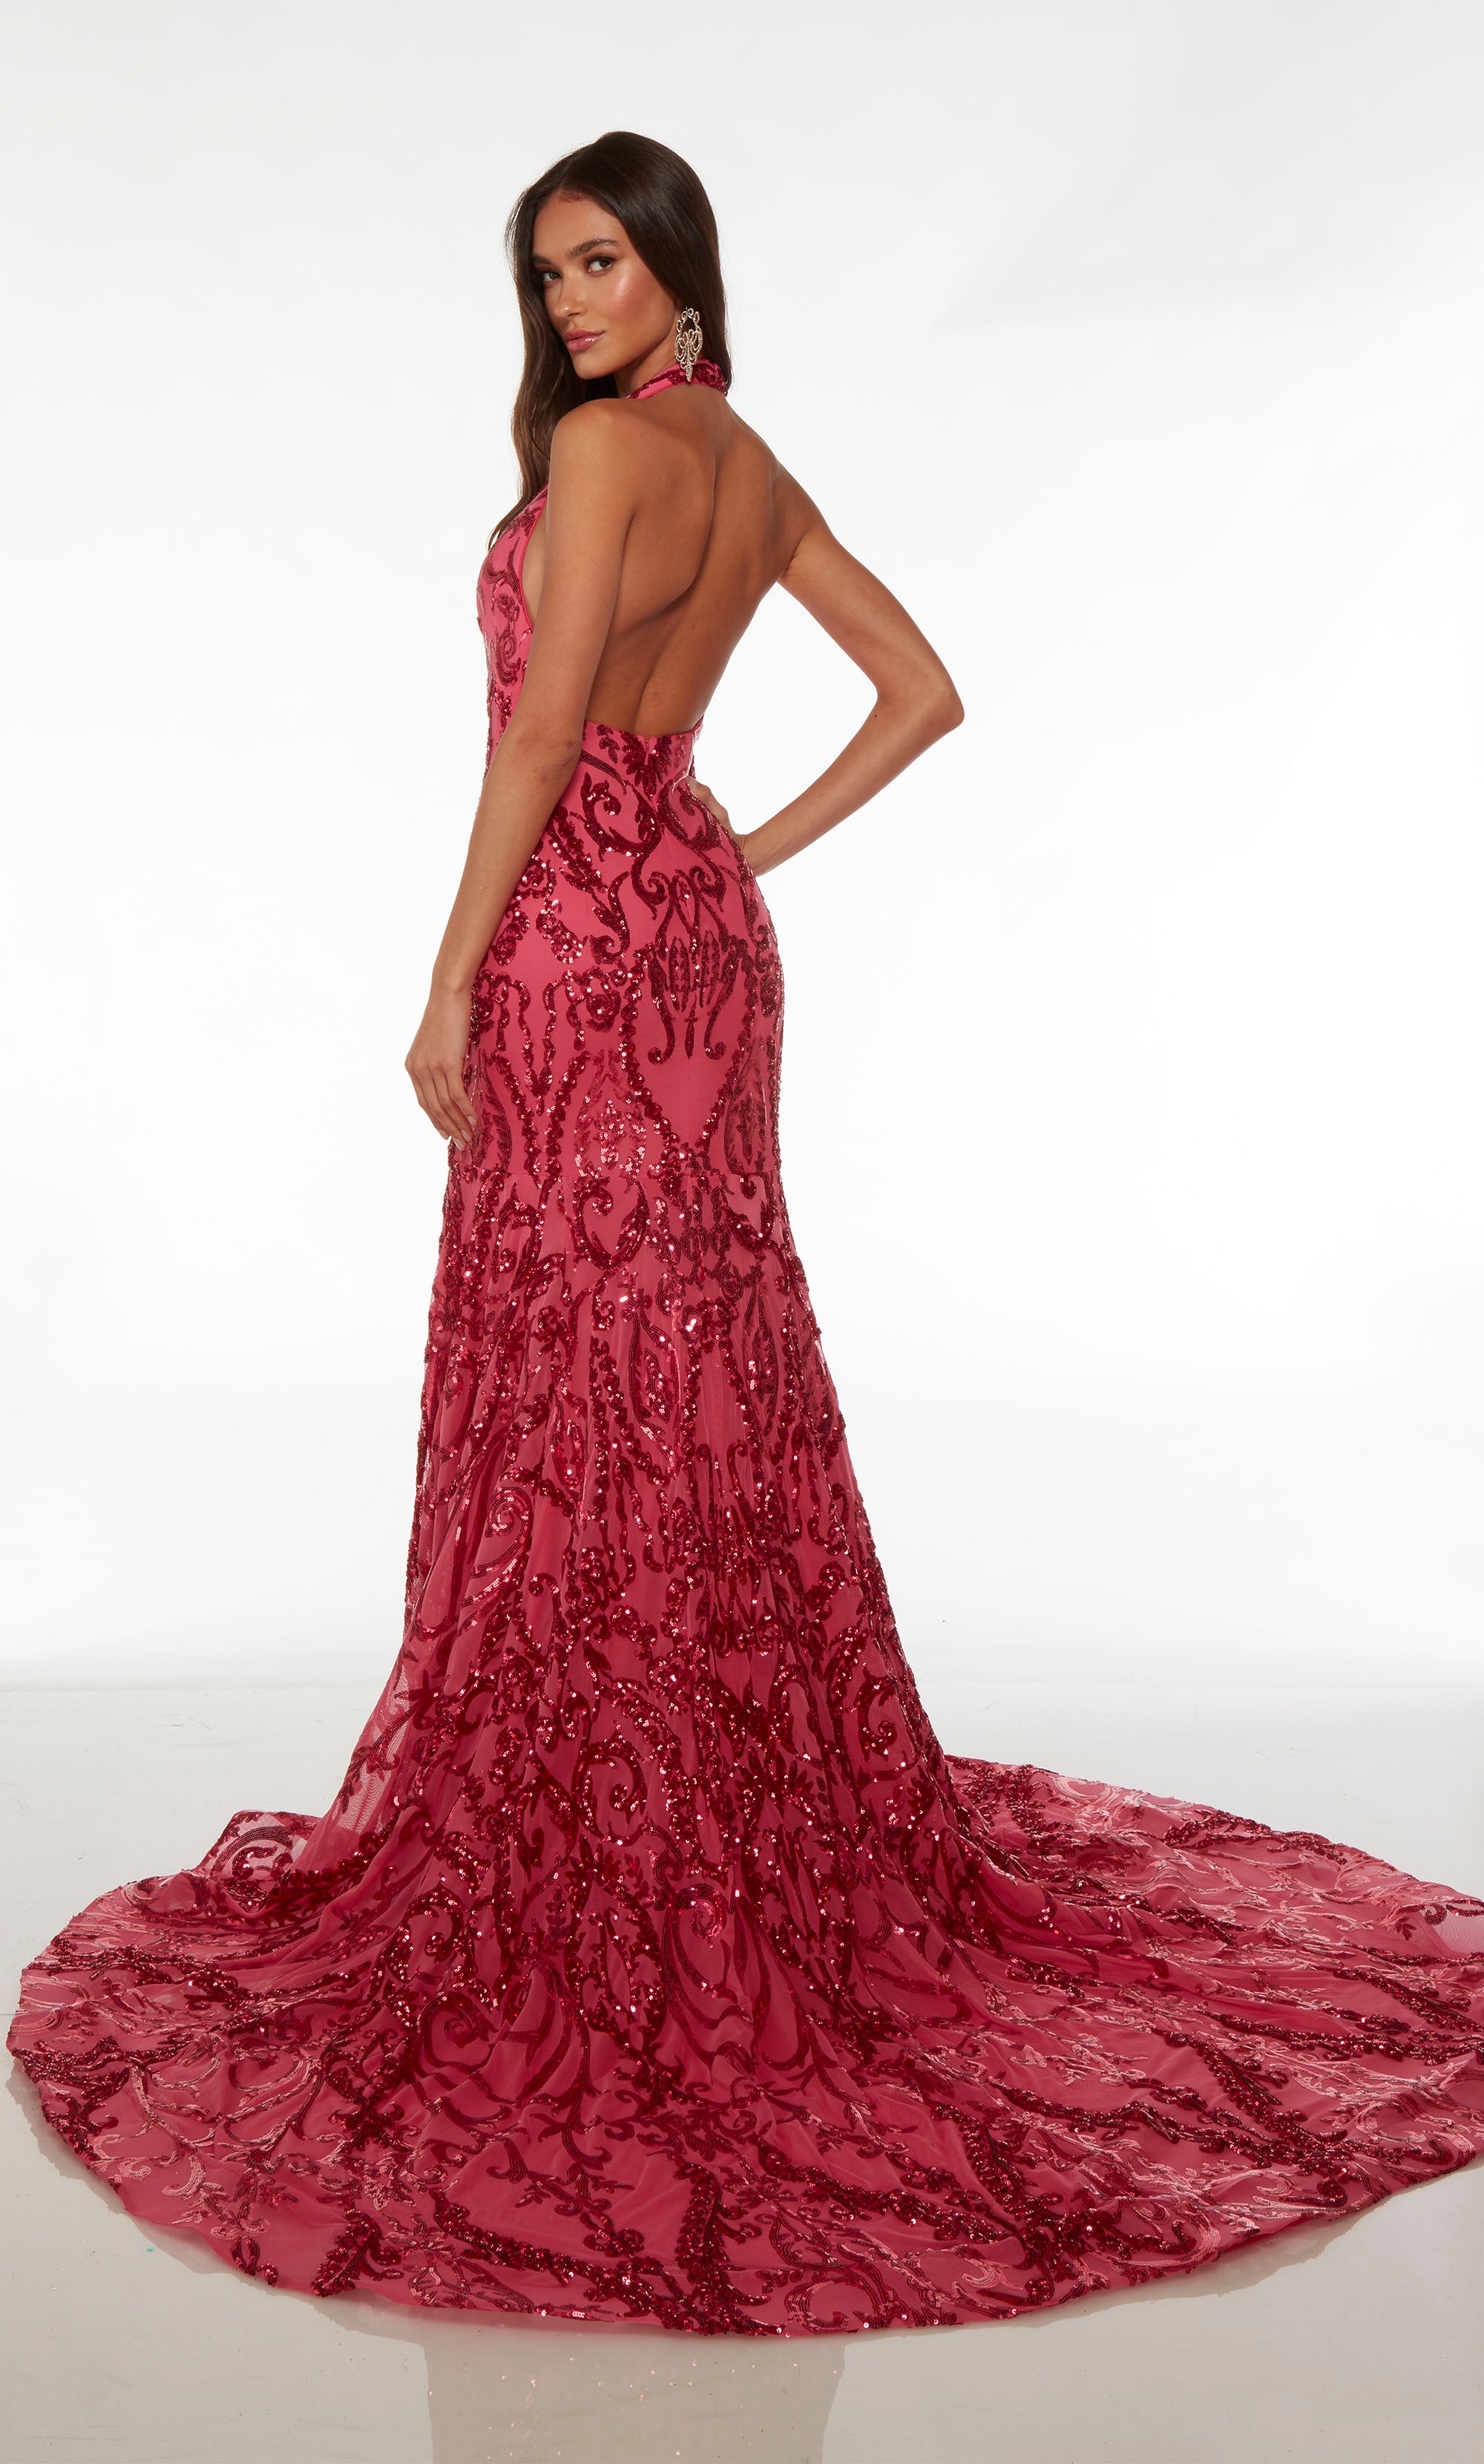 Dazzling mermaid dress in red paisley sequin fabric, featuring an plunging halter neck, open back, and an gracefully long train.